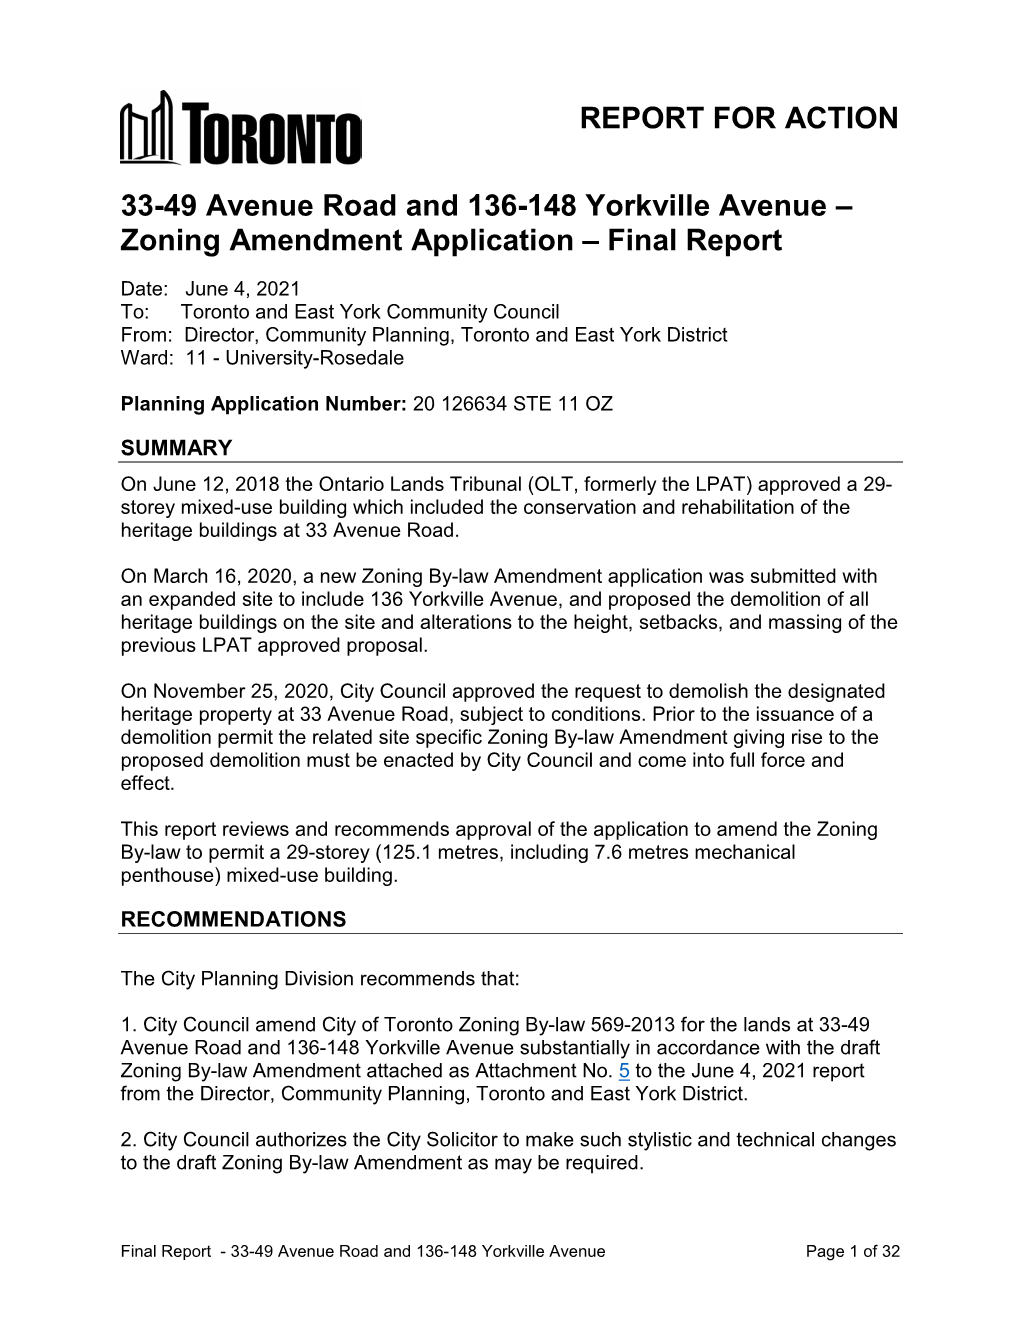 33-49 Avenue Road and 136-148 Yorkville Avenue – Zoning Amendment Application – Final Report